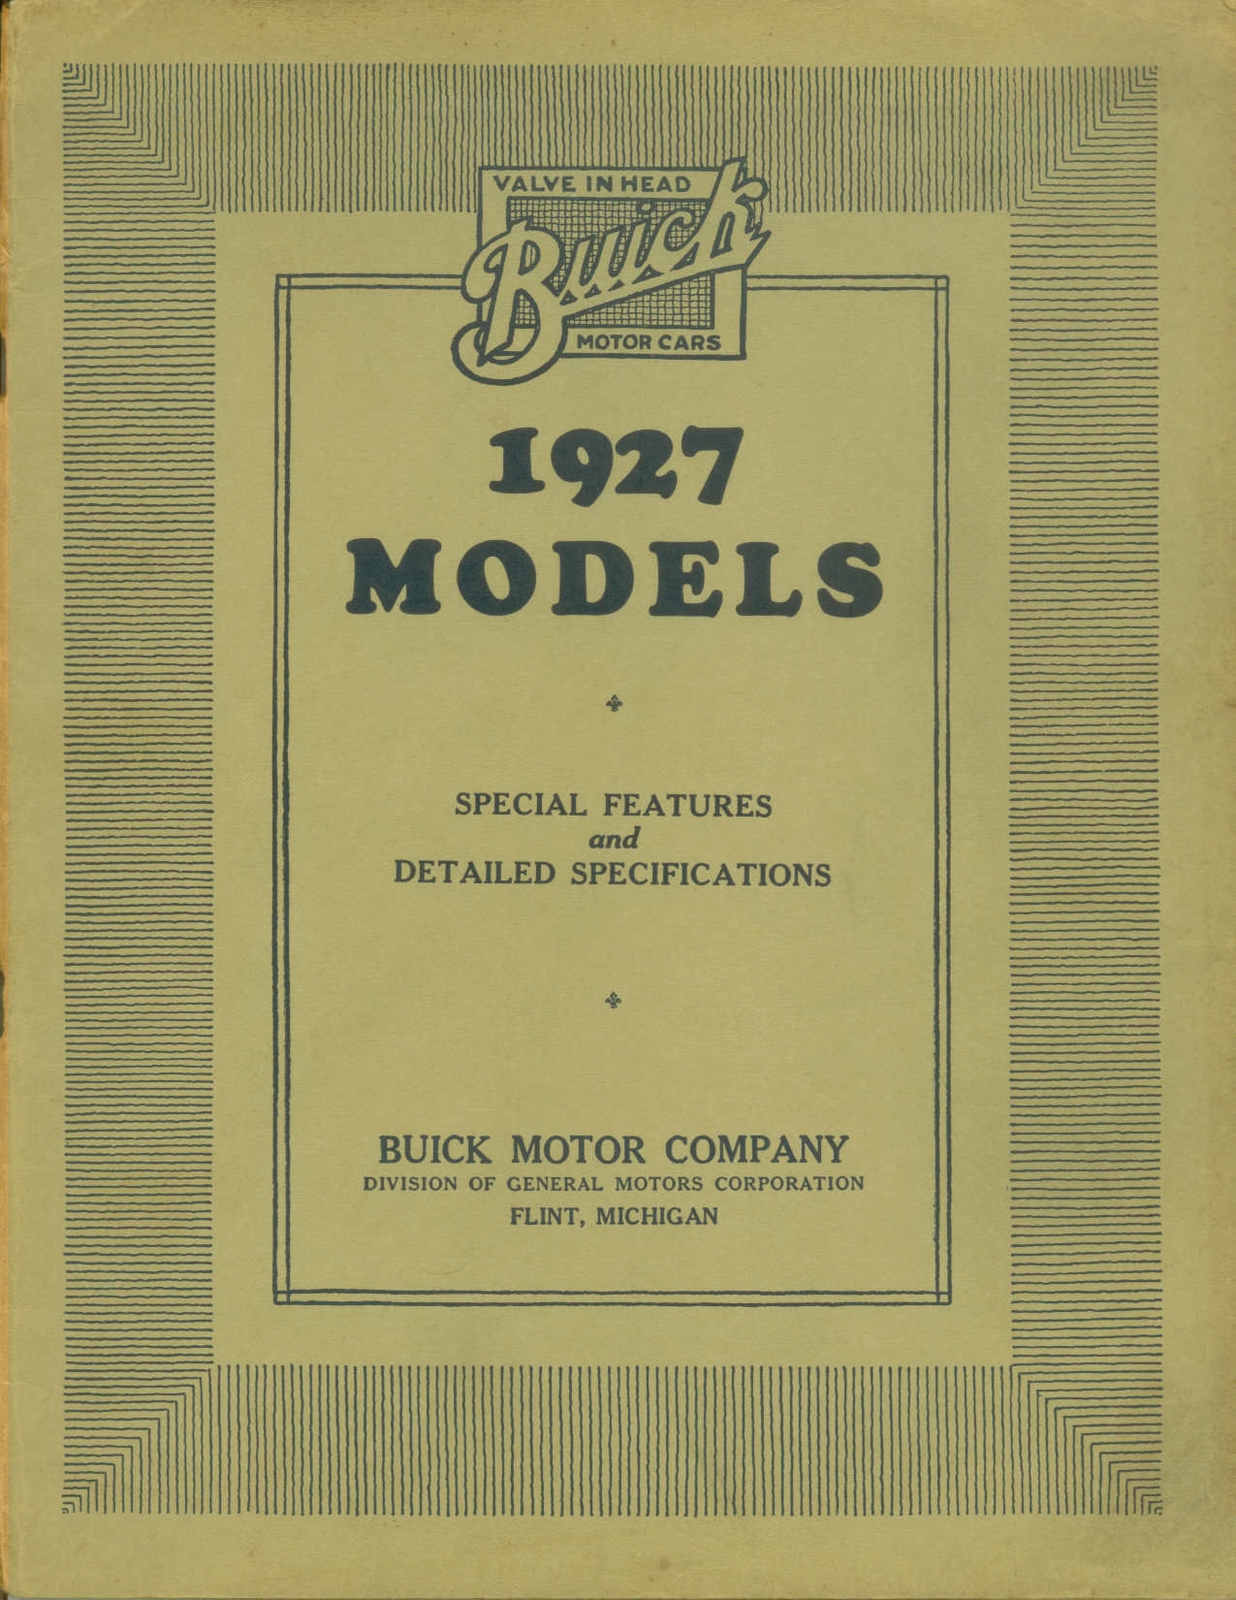 n_1927 Buick Special Features and Specs-00.jpg